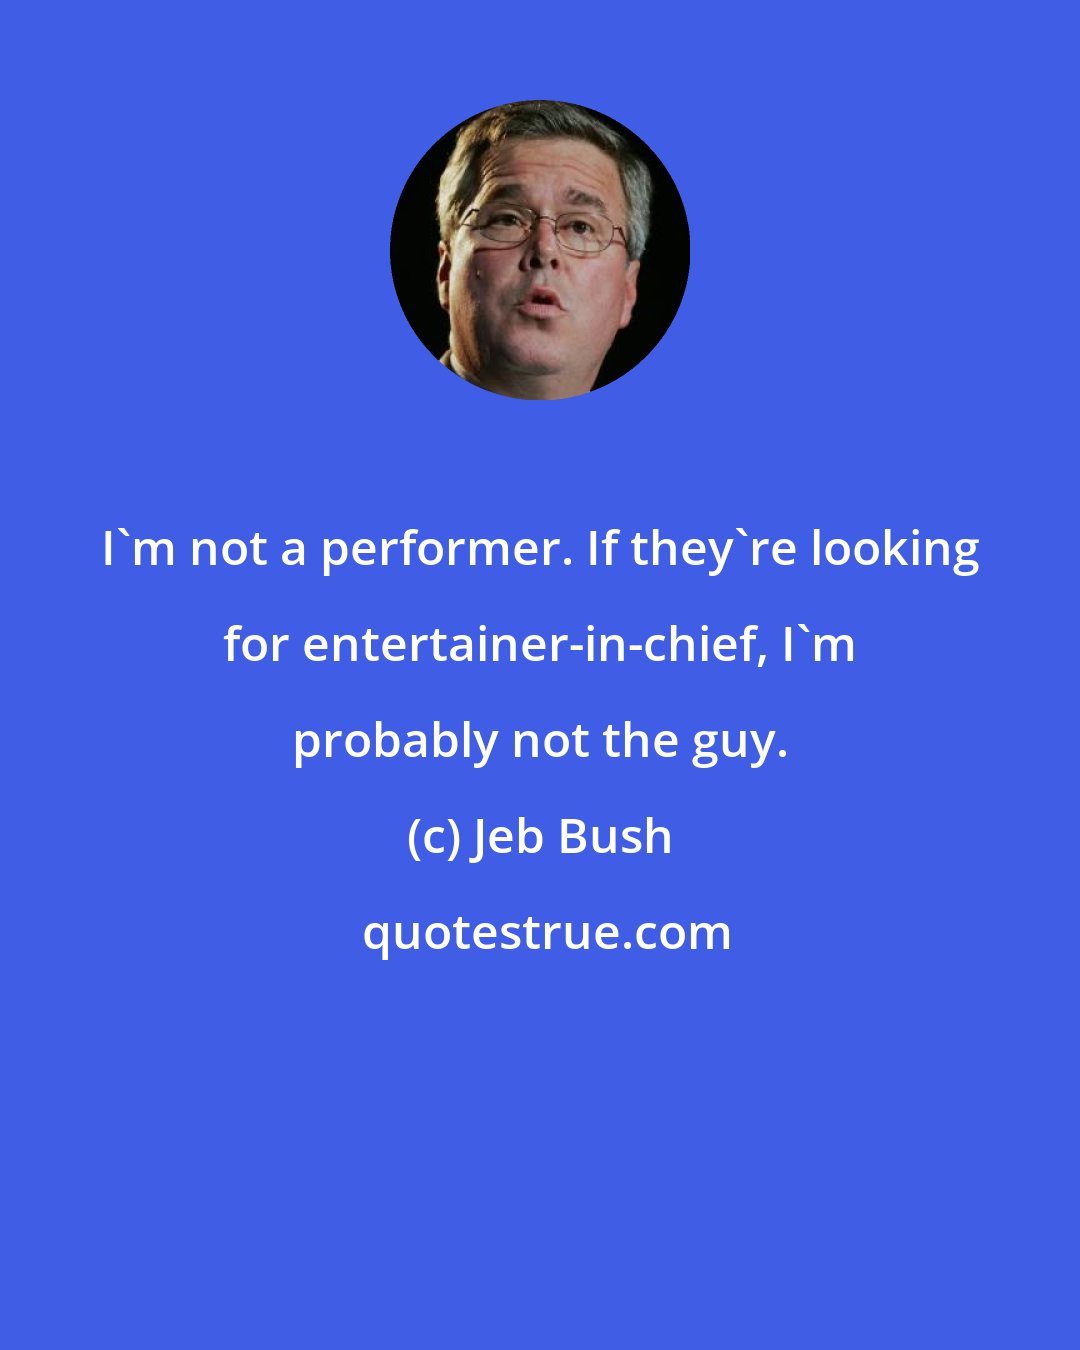 Jeb Bush: I'm not a performer. If they're looking for entertainer-in-chief, I'm probably not the guy.